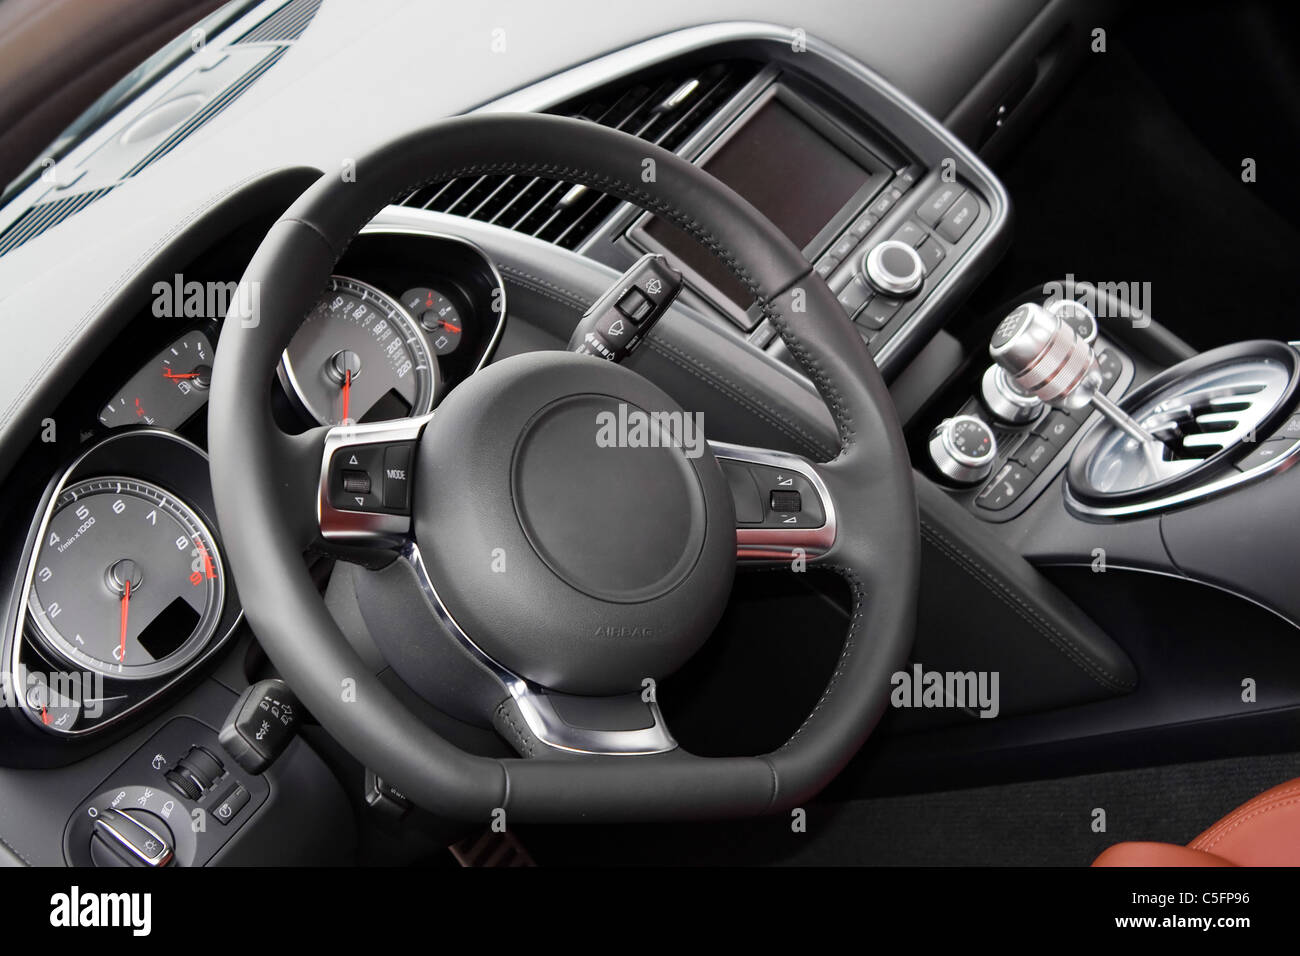 The interior of a modern luxury sports car Stock Photo